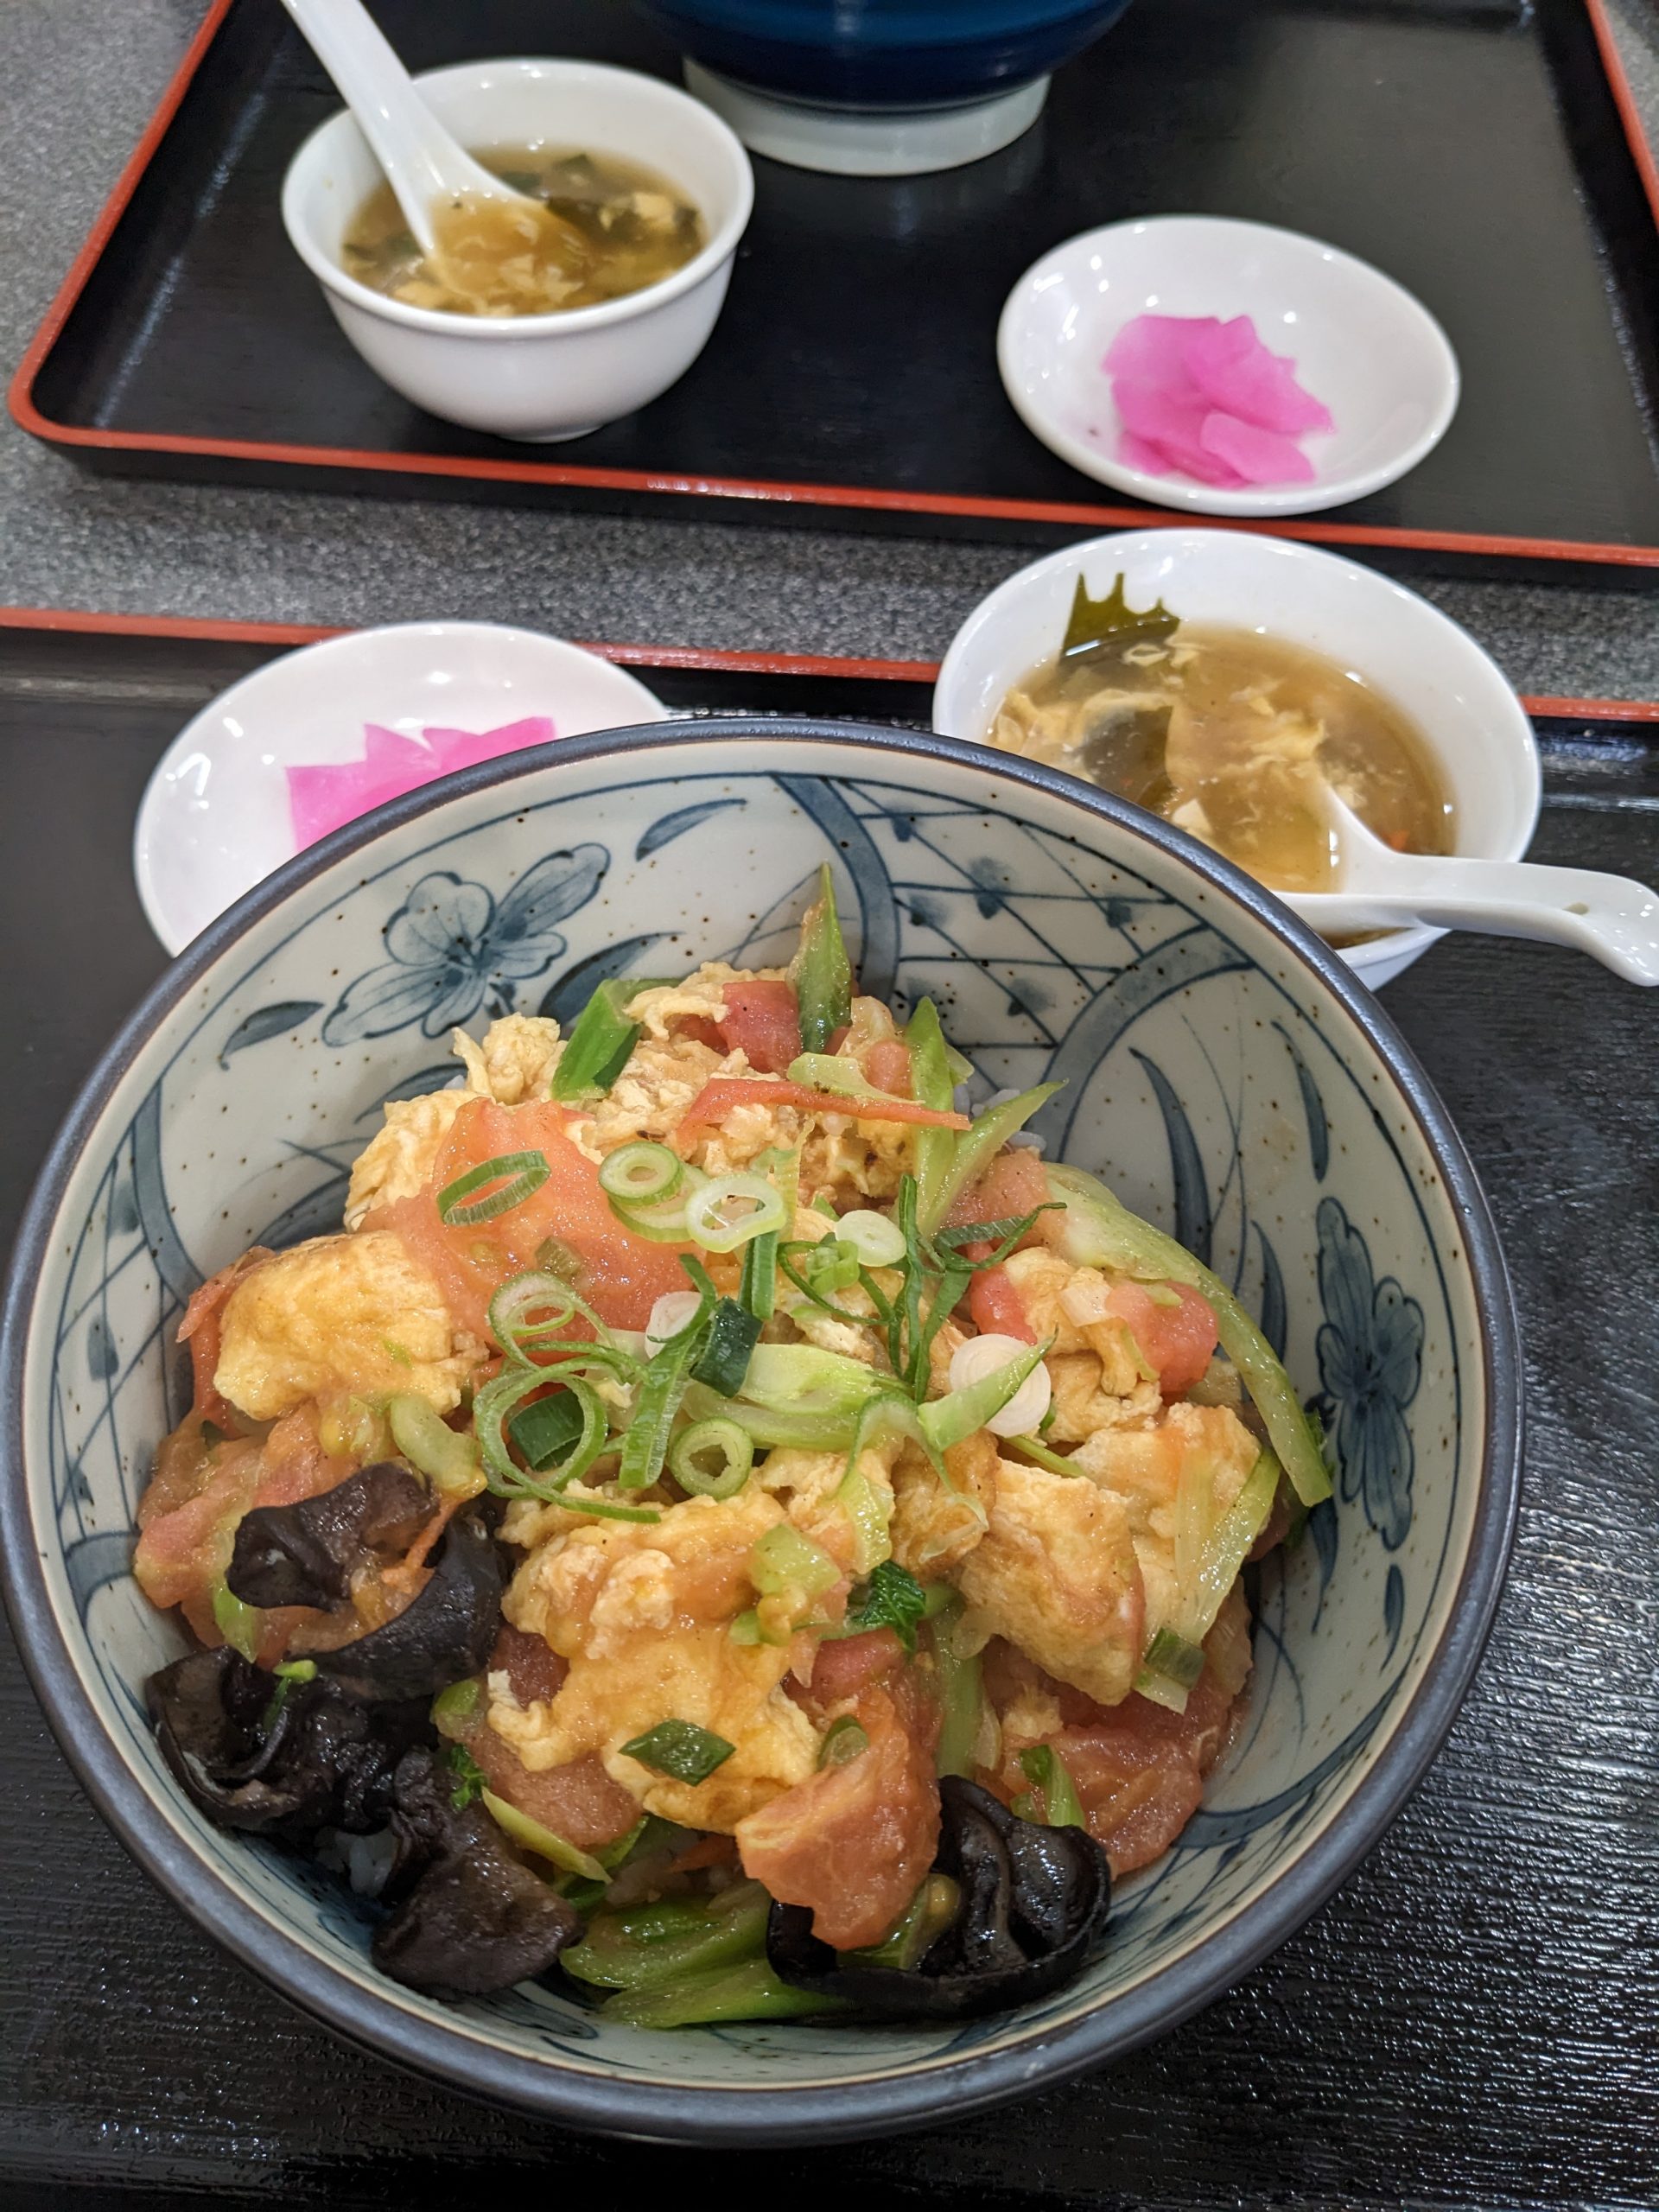 A large bowl filled with green onions, eggs, tomatoes, and mushrooms sit on a tray that has a bowl of soup and some pink pickled ginger.